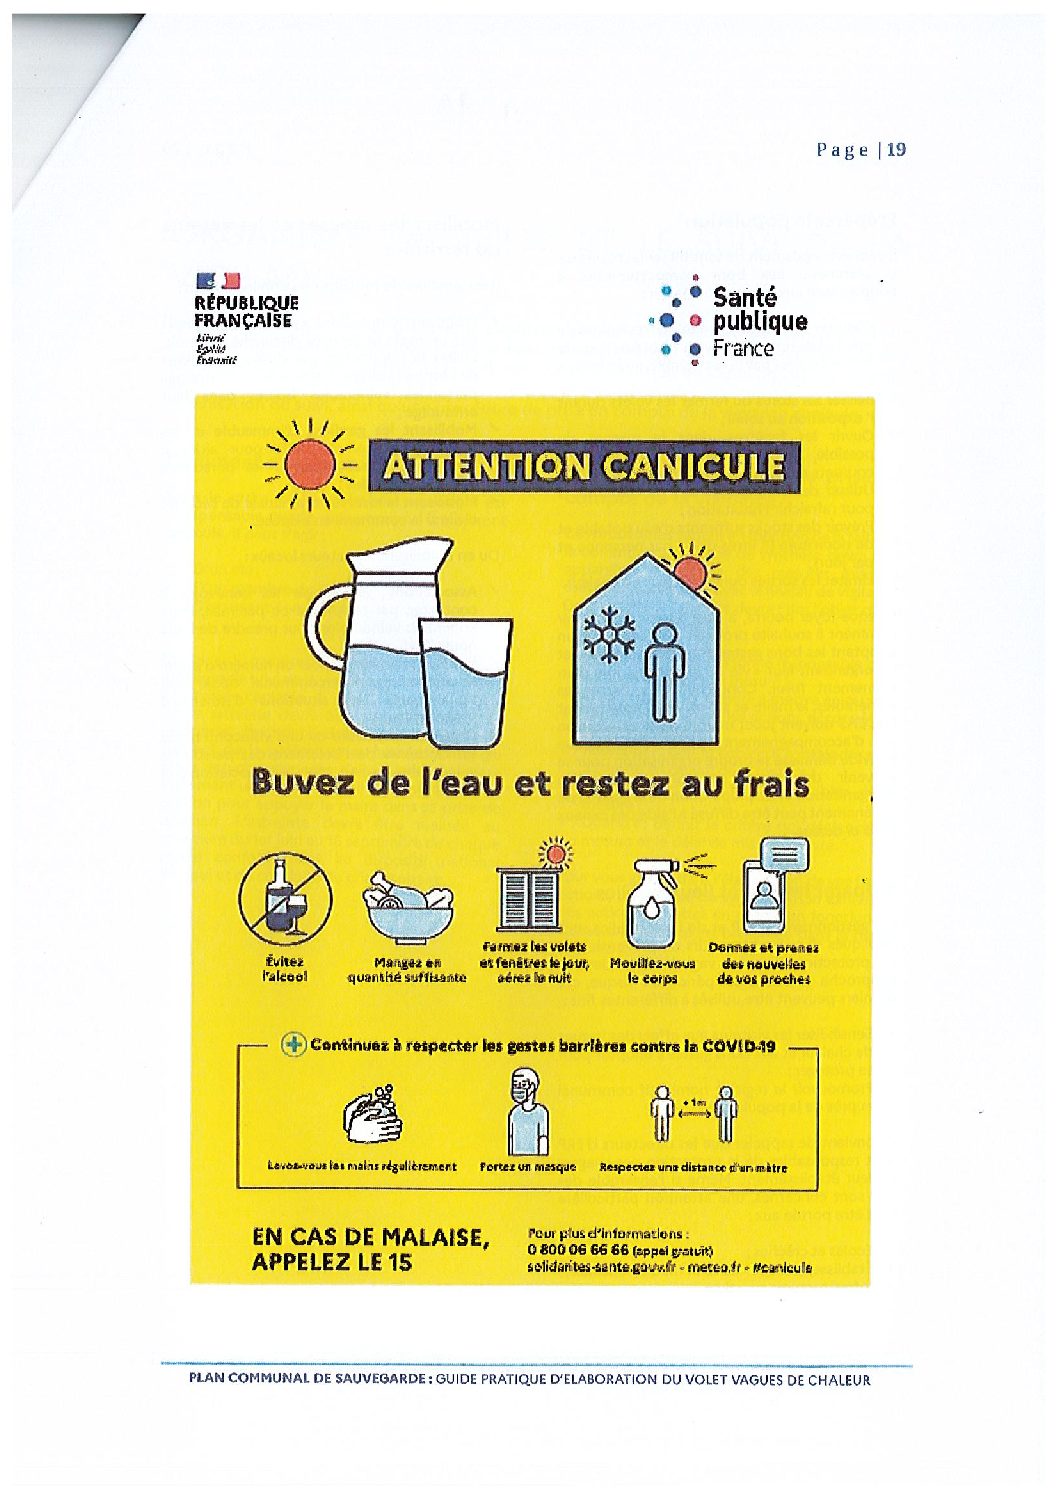 ATTENTION CANICULE